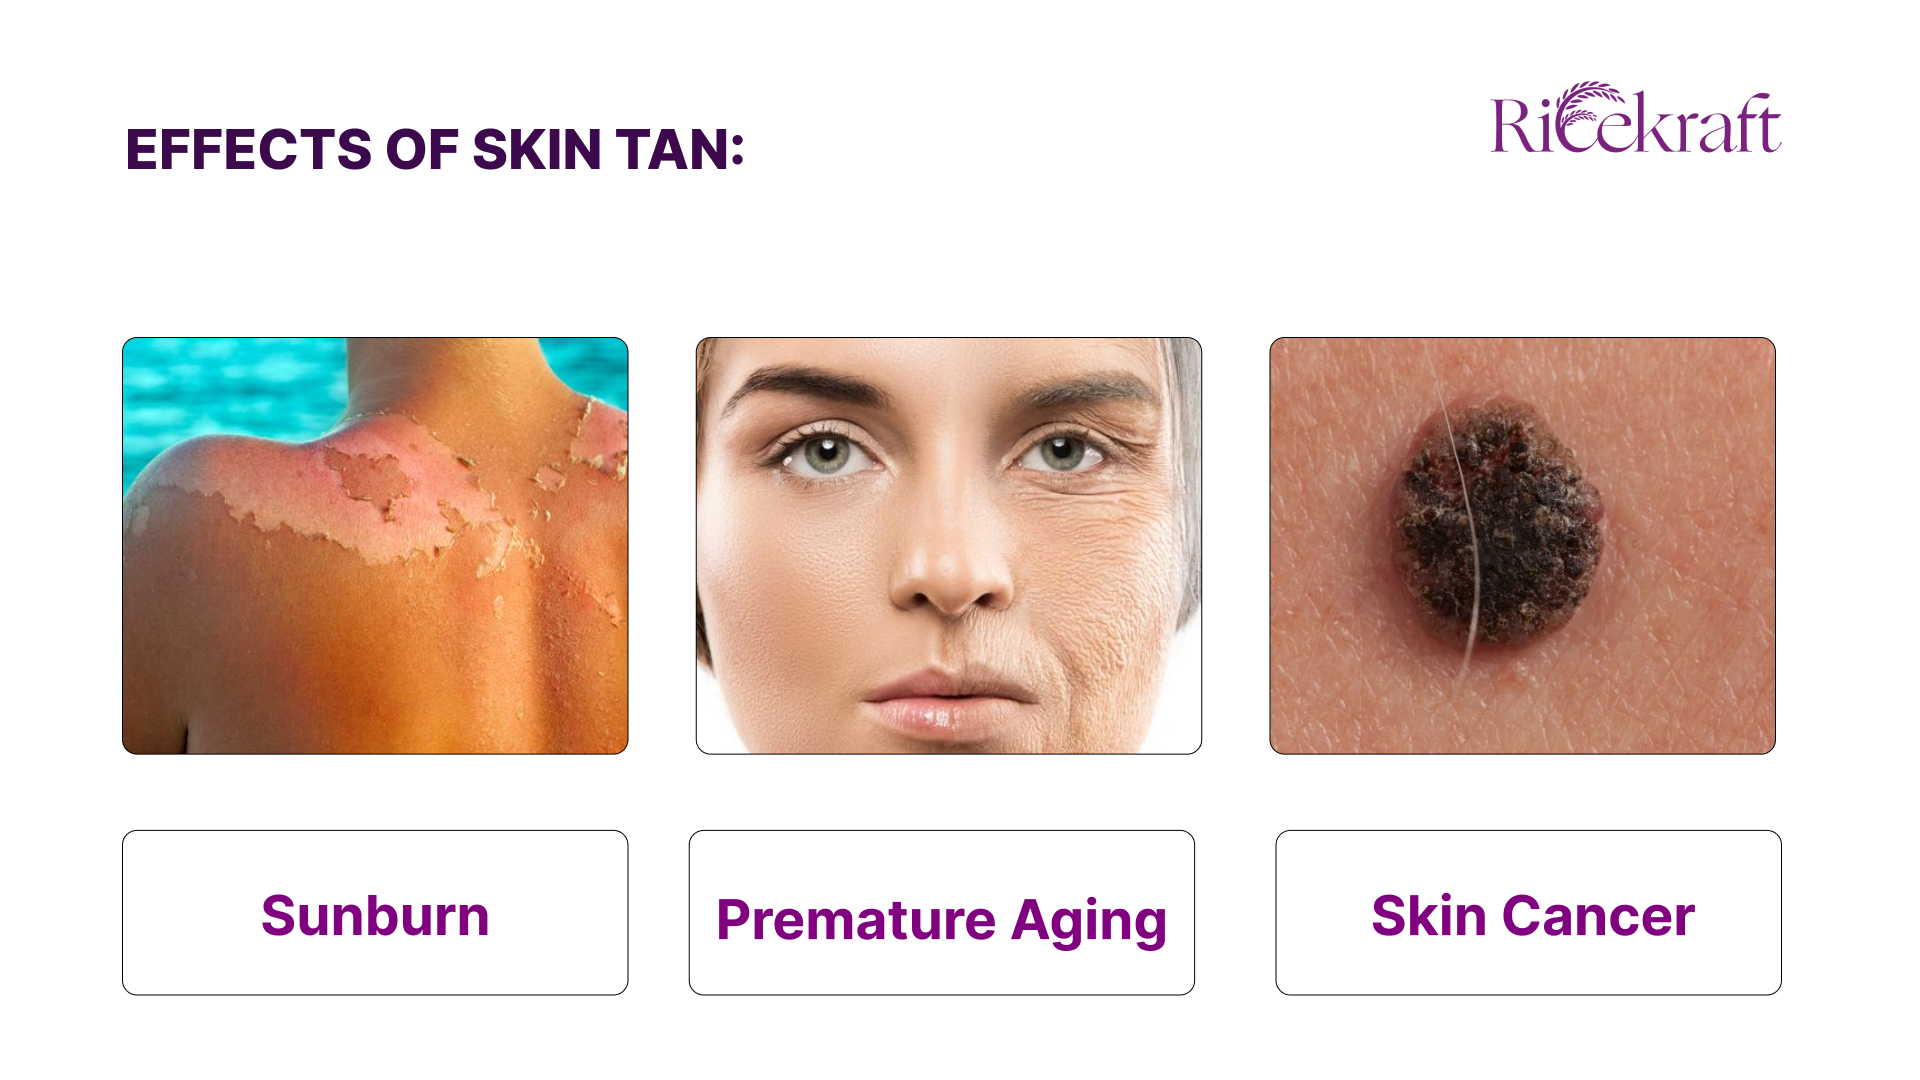 Effects of sun tan such as sunburn, skin cancer and premature aging